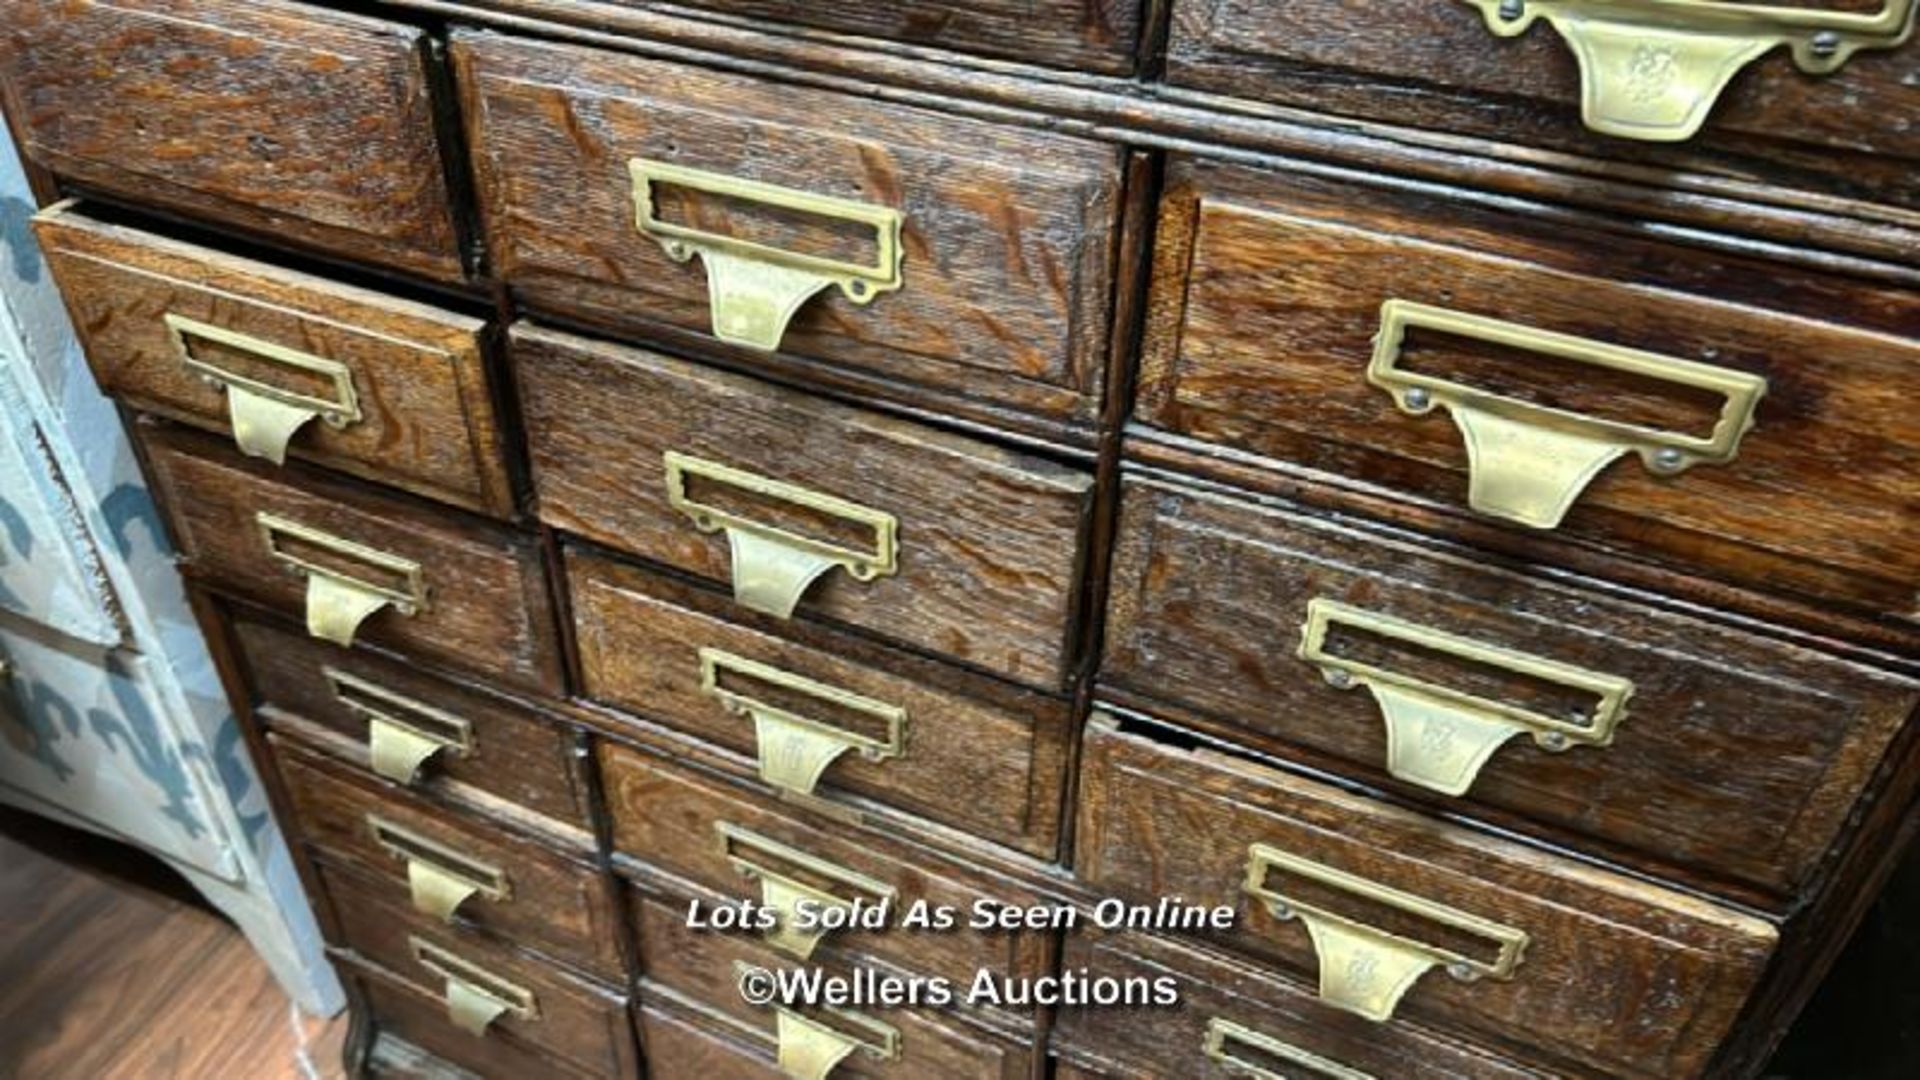 LATE 19TH CENTURY FILING CABINET, 27 DRAWERS, SHOWS WITH MISSING HANDLE, THE HANDLE IS PRESENT - Image 4 of 6